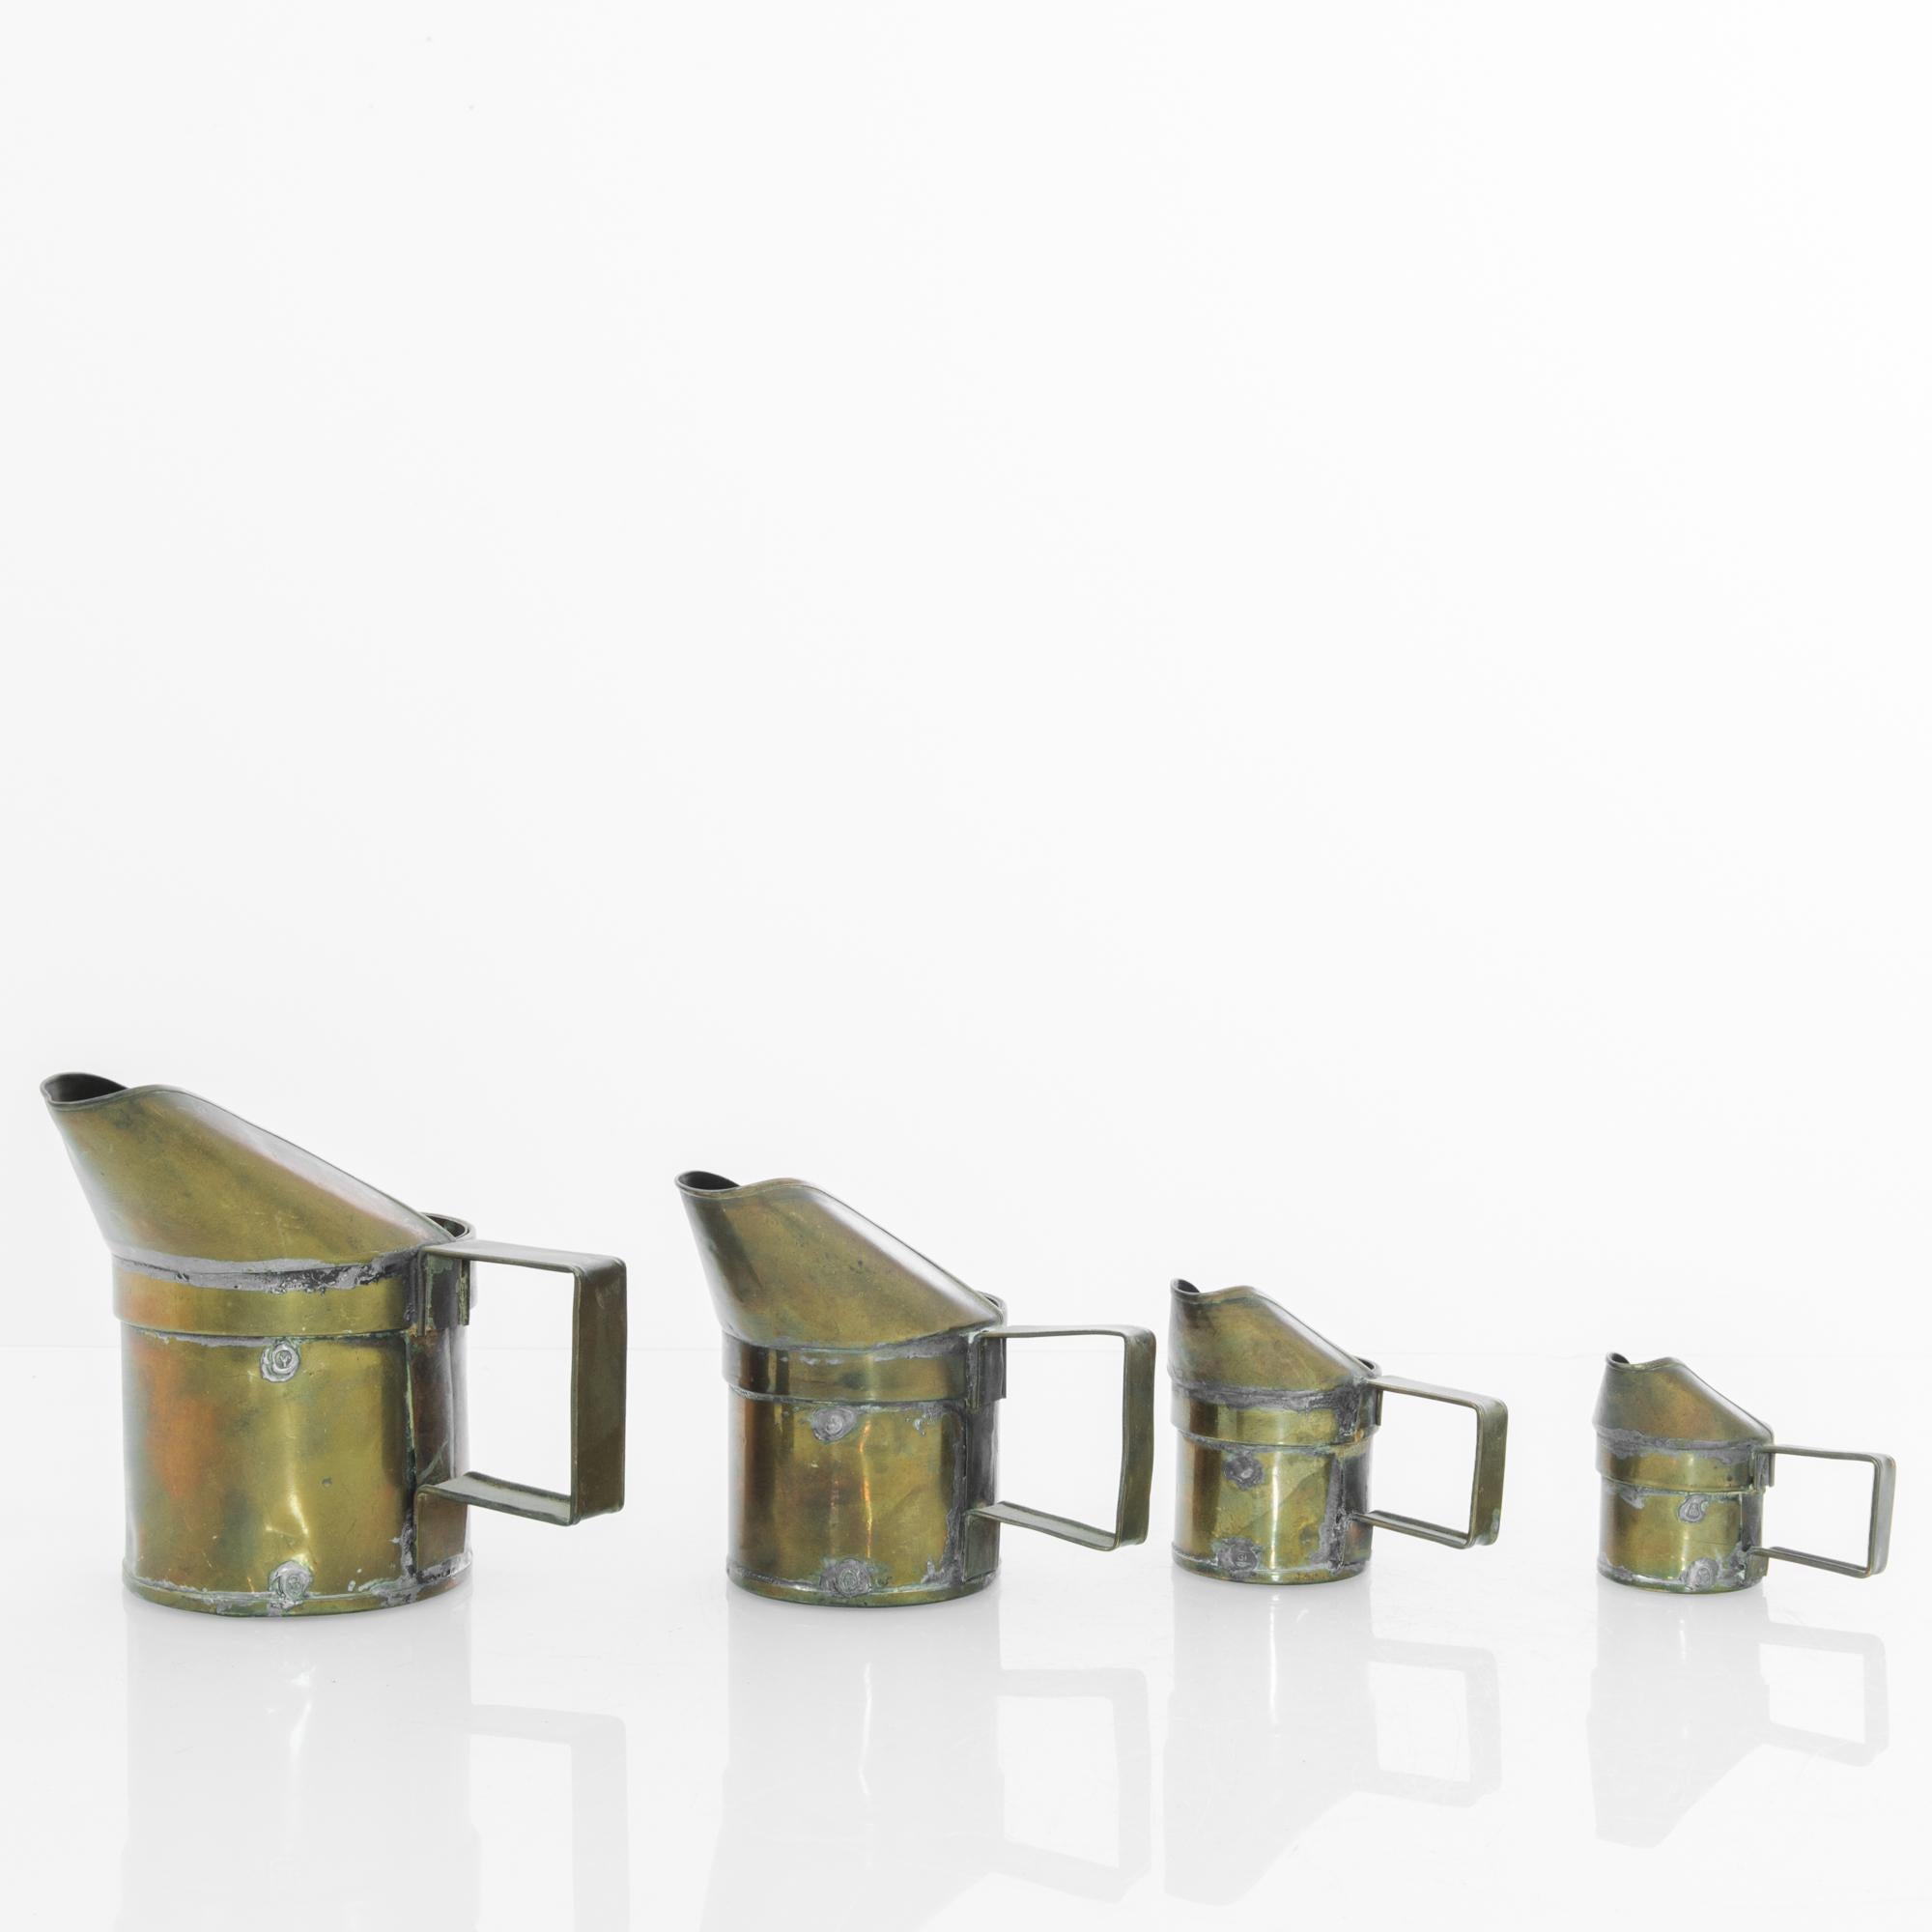 A set of four dry measures from Belgium, circa 1900. Early on in its life, these grain scoops lived as critical tools in commercial transactions—counting off consistent measures, keeping accounts square. Now retired, it’s the perfect accent piece